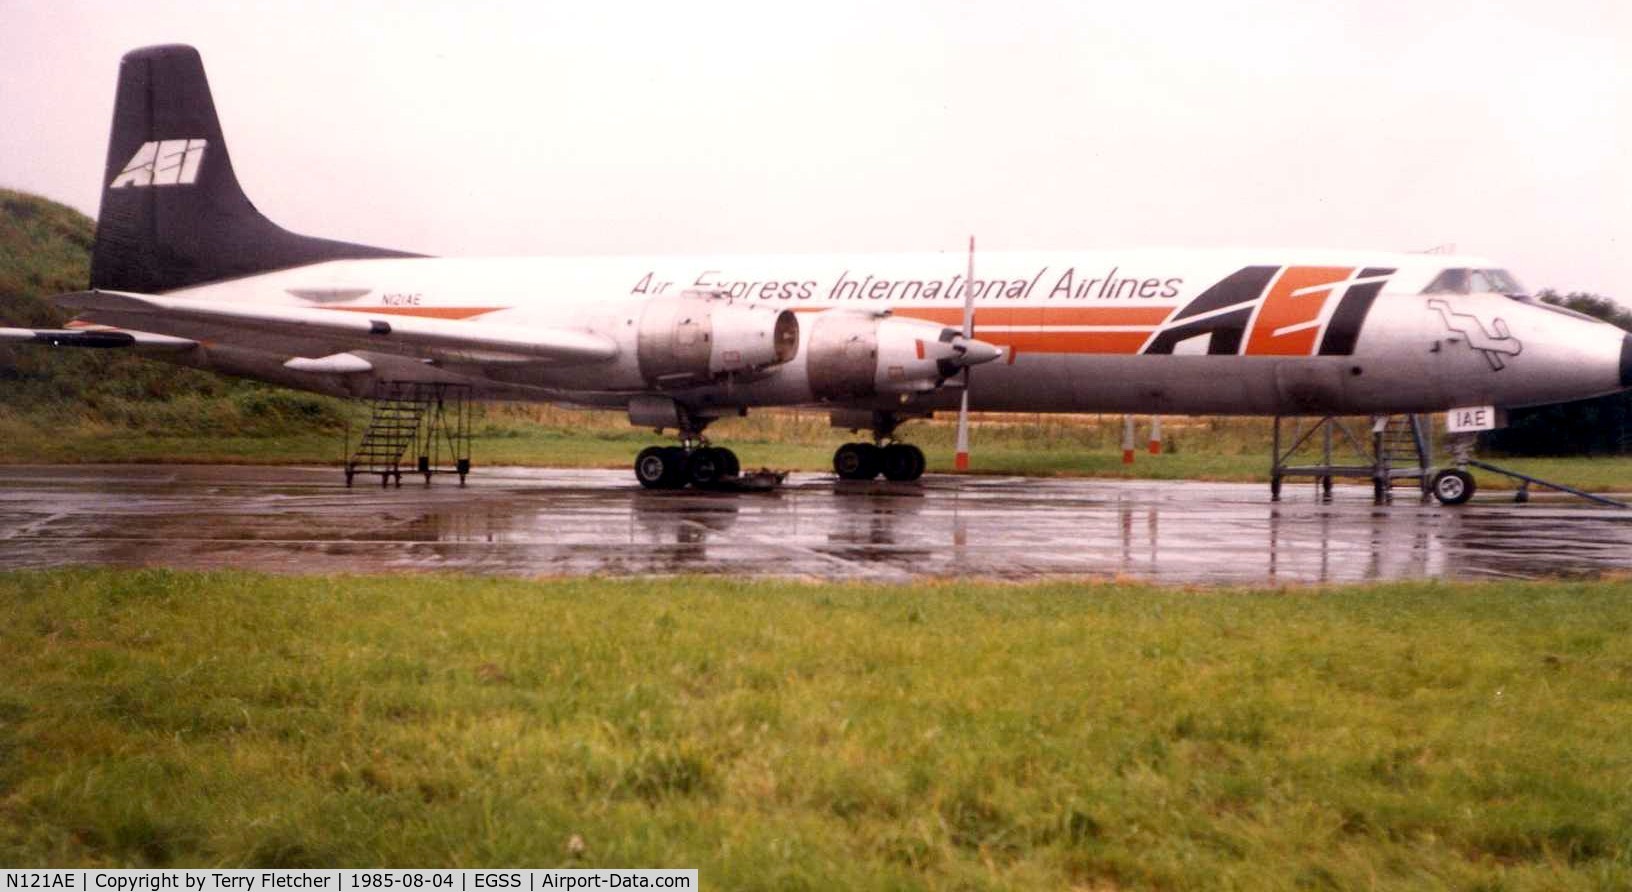 N121AE, Canadair CL-44D4 C/N 38, Air Express International Airlines classic CL-44 freighter is pictured at Stansted , England in 1985